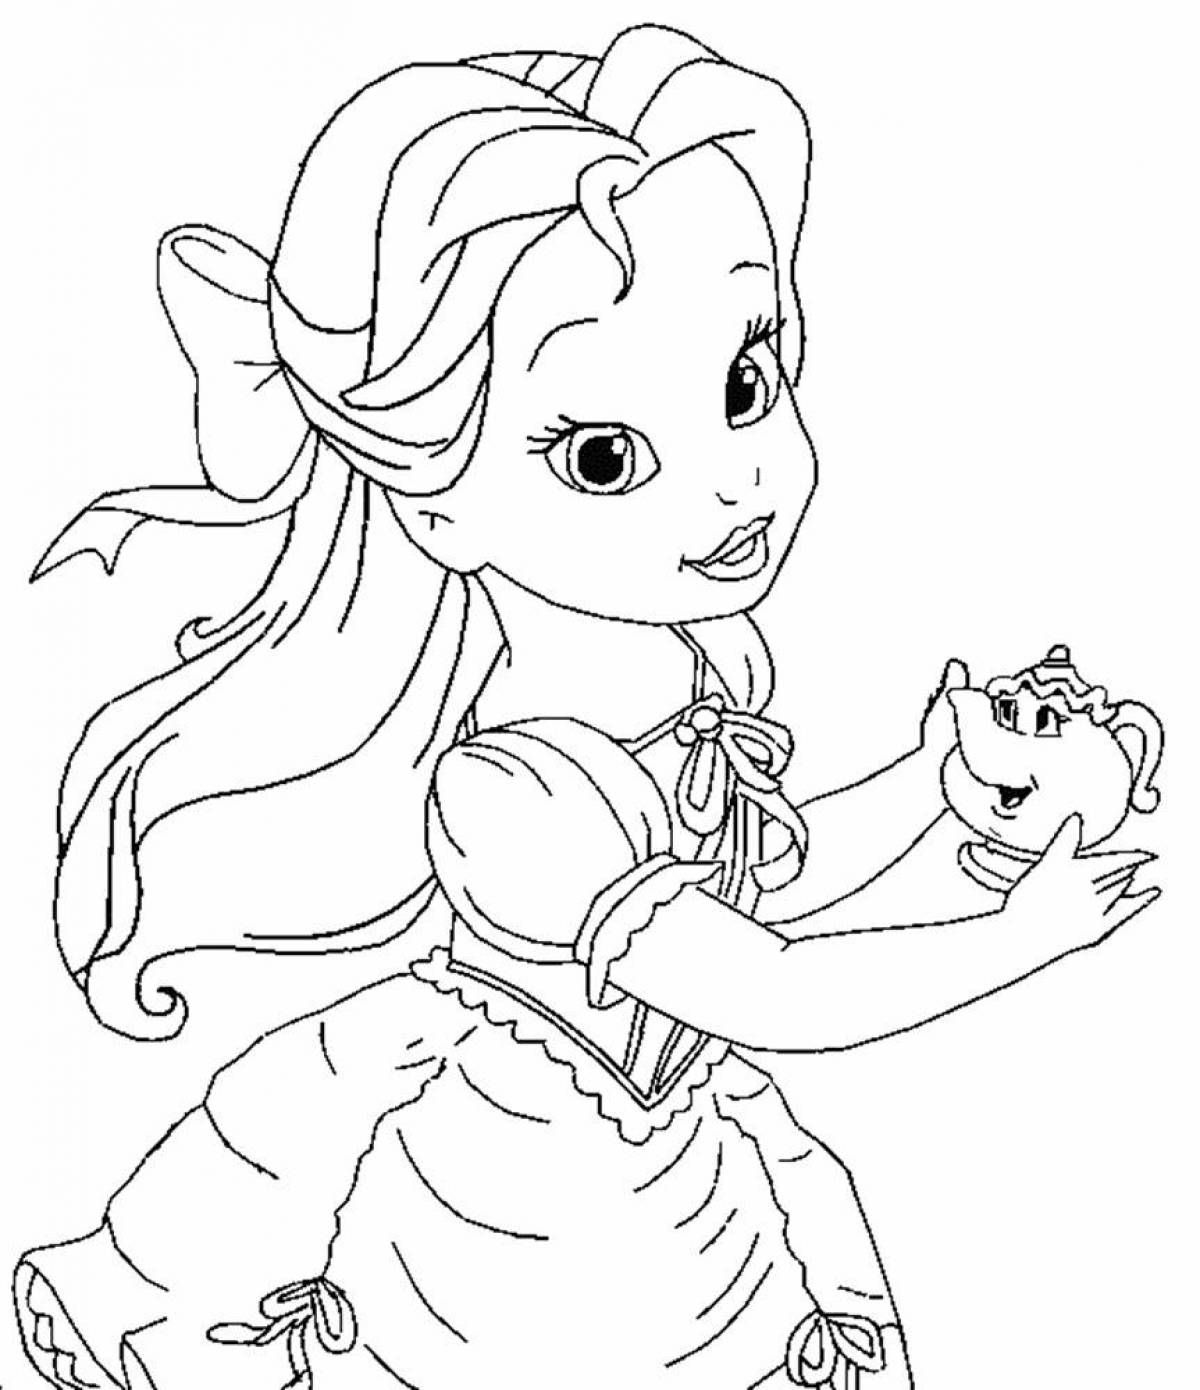 Belle's colorful coloring book